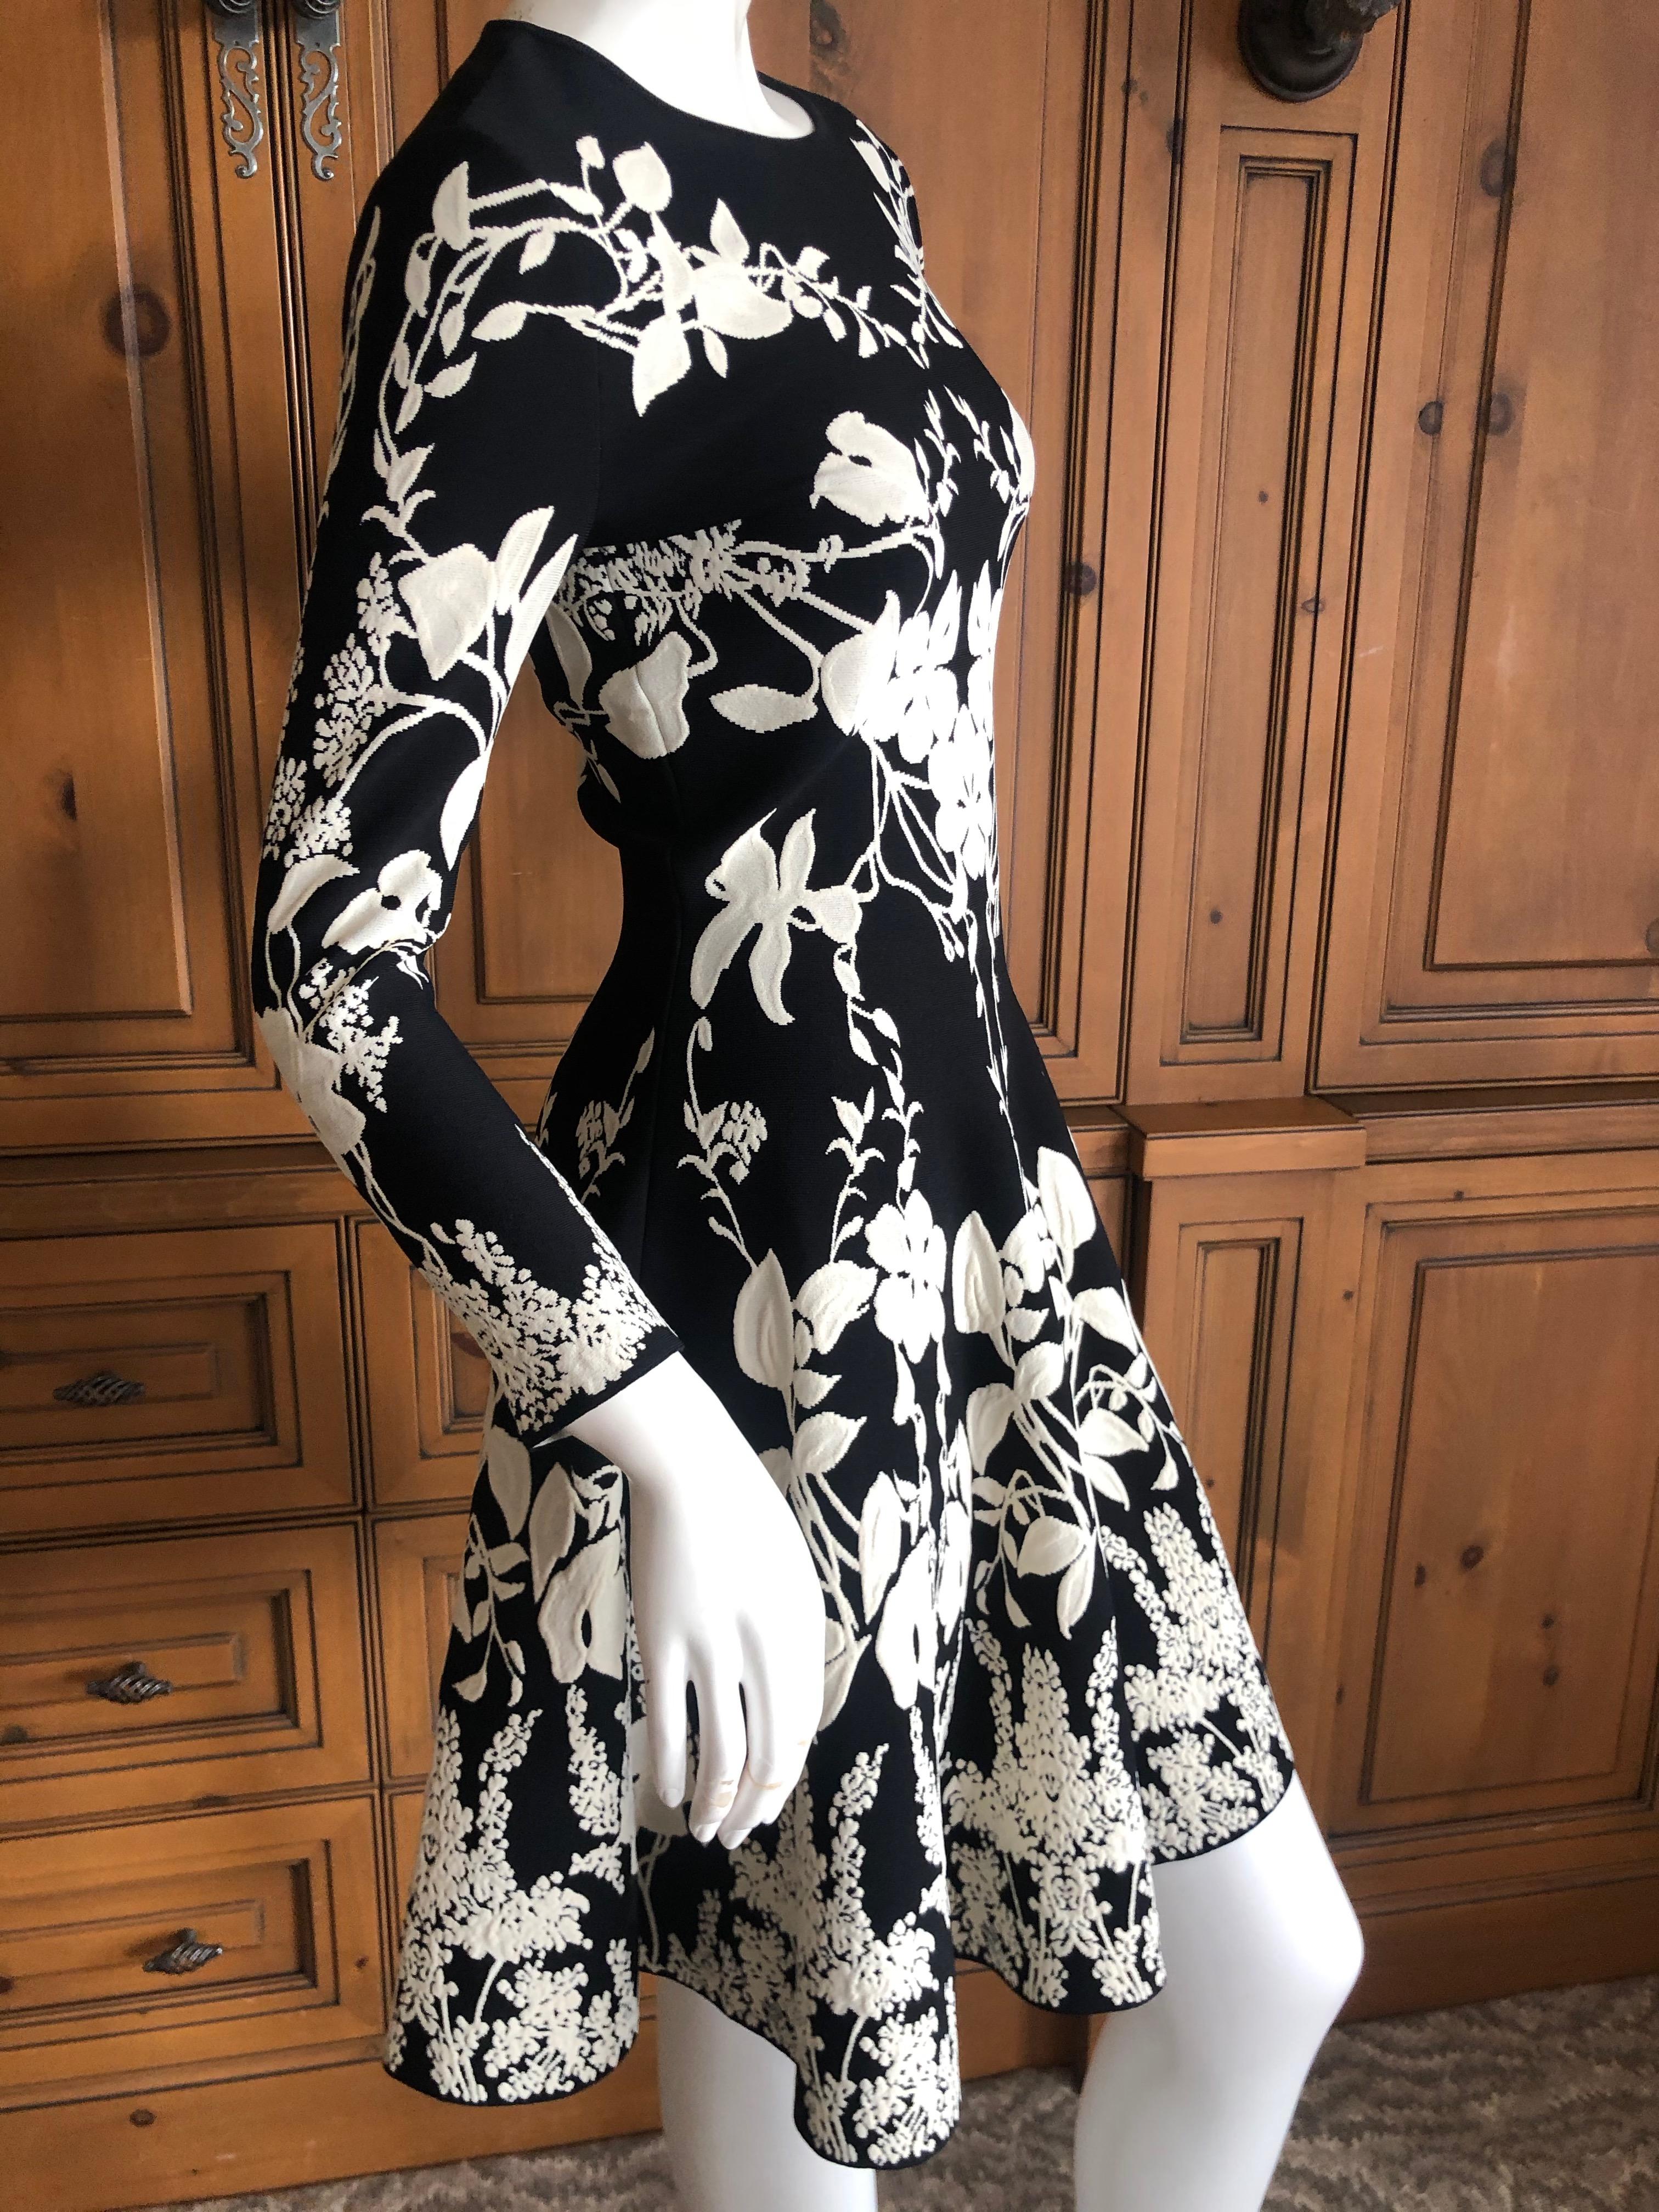 Alexander McQueen Black and White Inartsia Floral Knit Dress with Skater Skirt For Sale 1